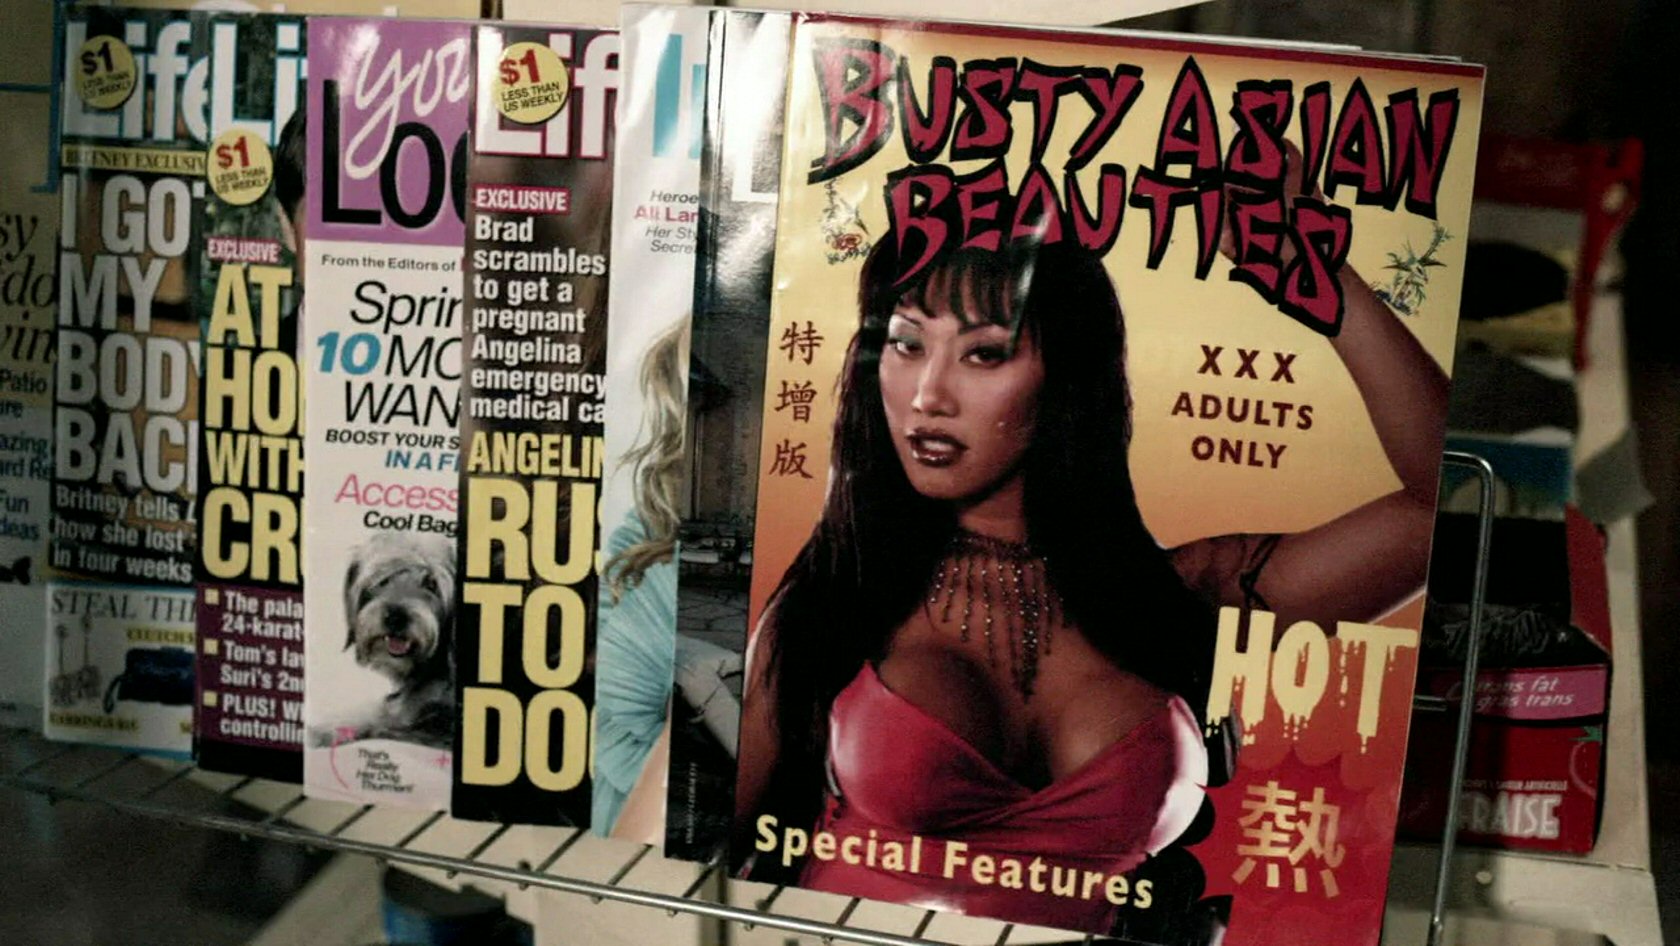 Episodes Busty Asian Beauties On The Shelf In Lazarus Rising